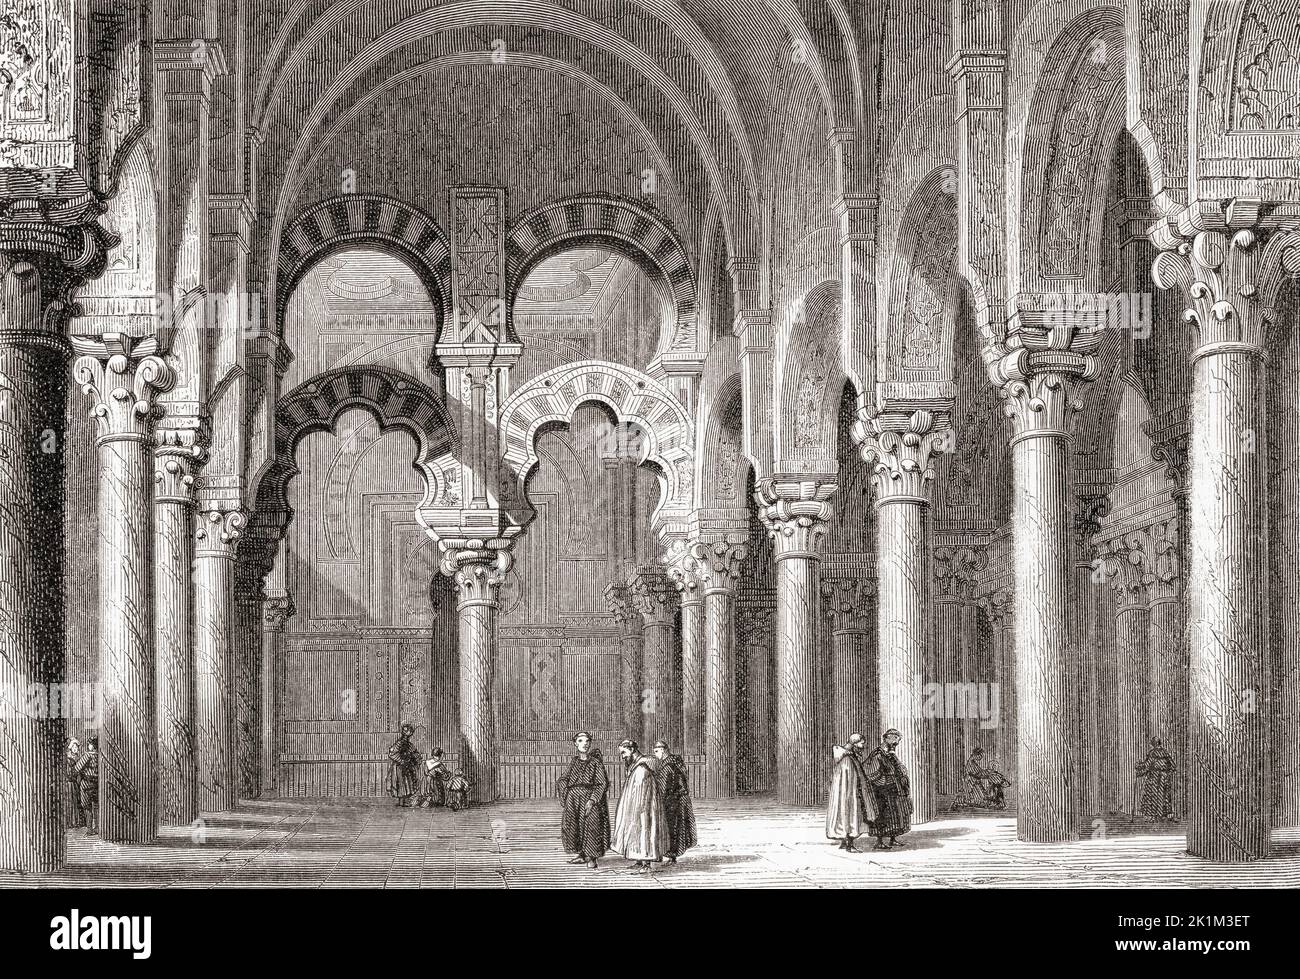 Interior of the Mosque–Cathedral of Córdoba, Córdoba, Andalusia, Spain, seen here in the 19th century.  Of Moorish and Renaissance architectural styles, building began in 785 (as a mosque) and the last major addition as a cathedral was completed in the 16th century.  From Les Plus Belles Eglises du Monde, published 1861. Stock Photo